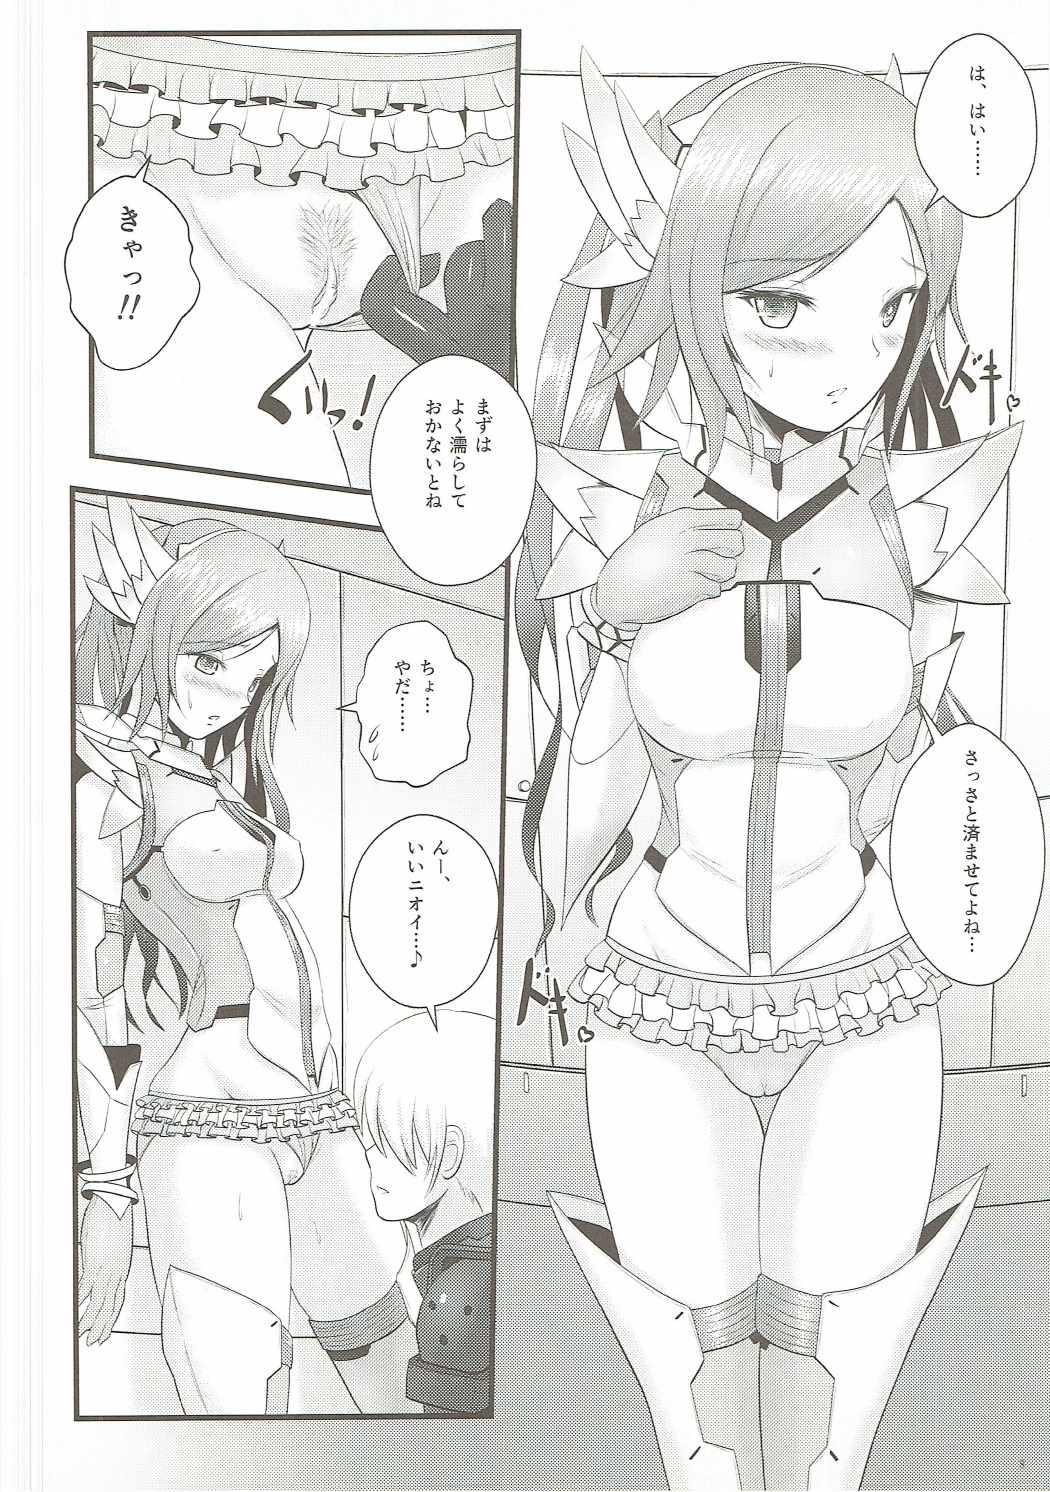 Best Blow Job Seagull's Love Song - Phantasy star online 2 Hooker - Page 5